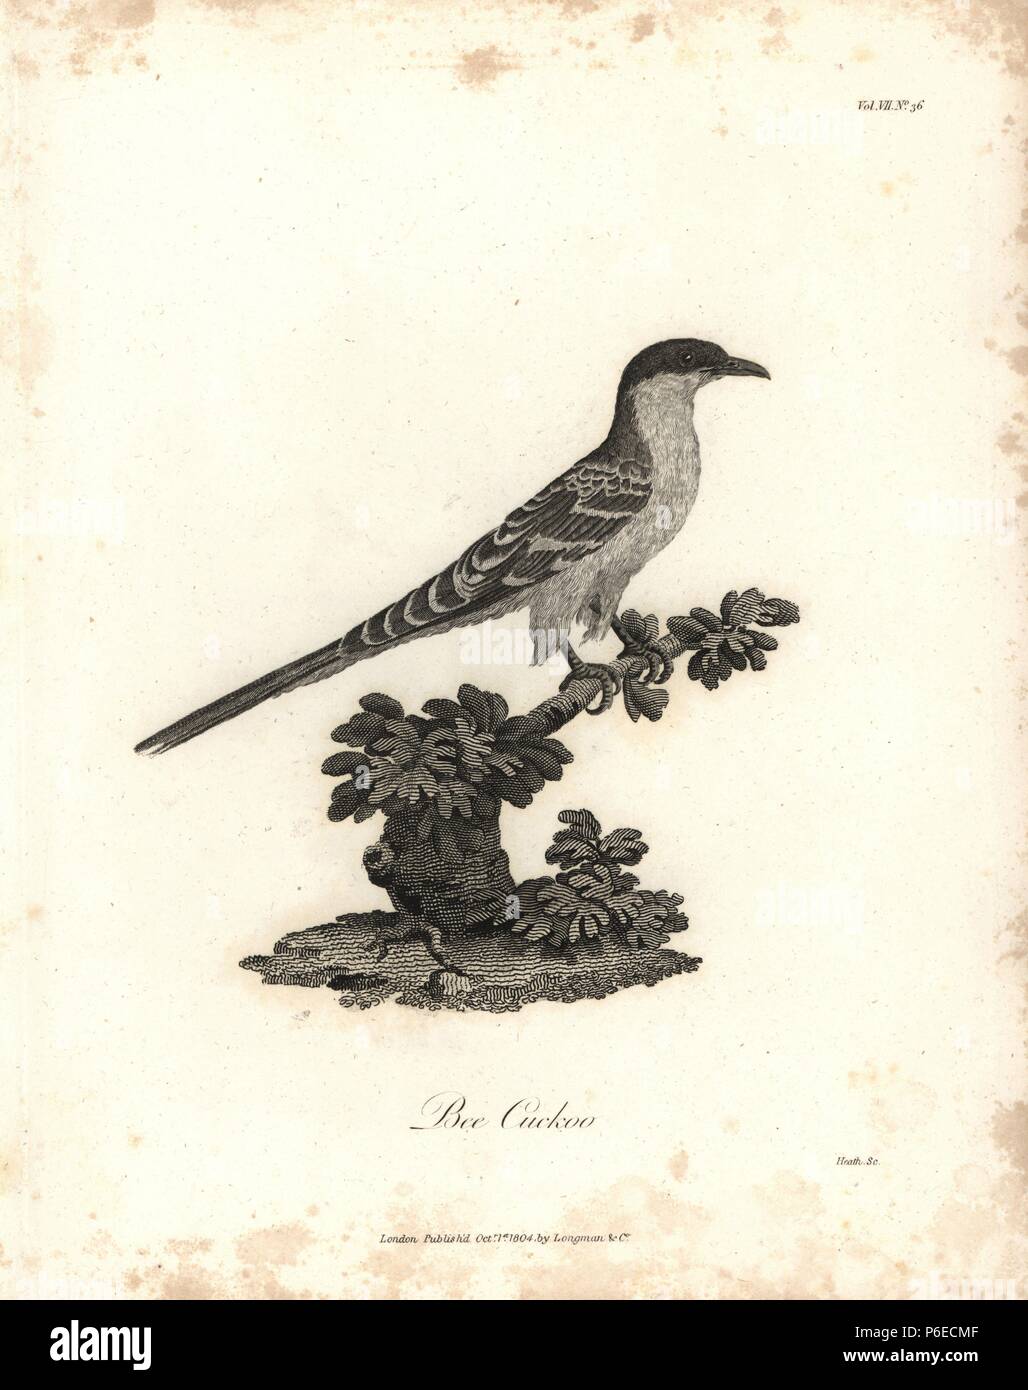 Bee cuckow or great spotted cuckoo, Clamator glandarius. Copperplate engraving from James Bruce's 'Travels to Discover the Source of the Nile, in the years 1768, 1769, 1770, 1771, 1772 and 1773,' London, 1790. James Bruce (1730-1794) was a Scottish explorer and travel writer who spent more than 12 years in North Africa and Ethiopia. Engraved by Heath after an original drawing by Bruce. Stock Photo